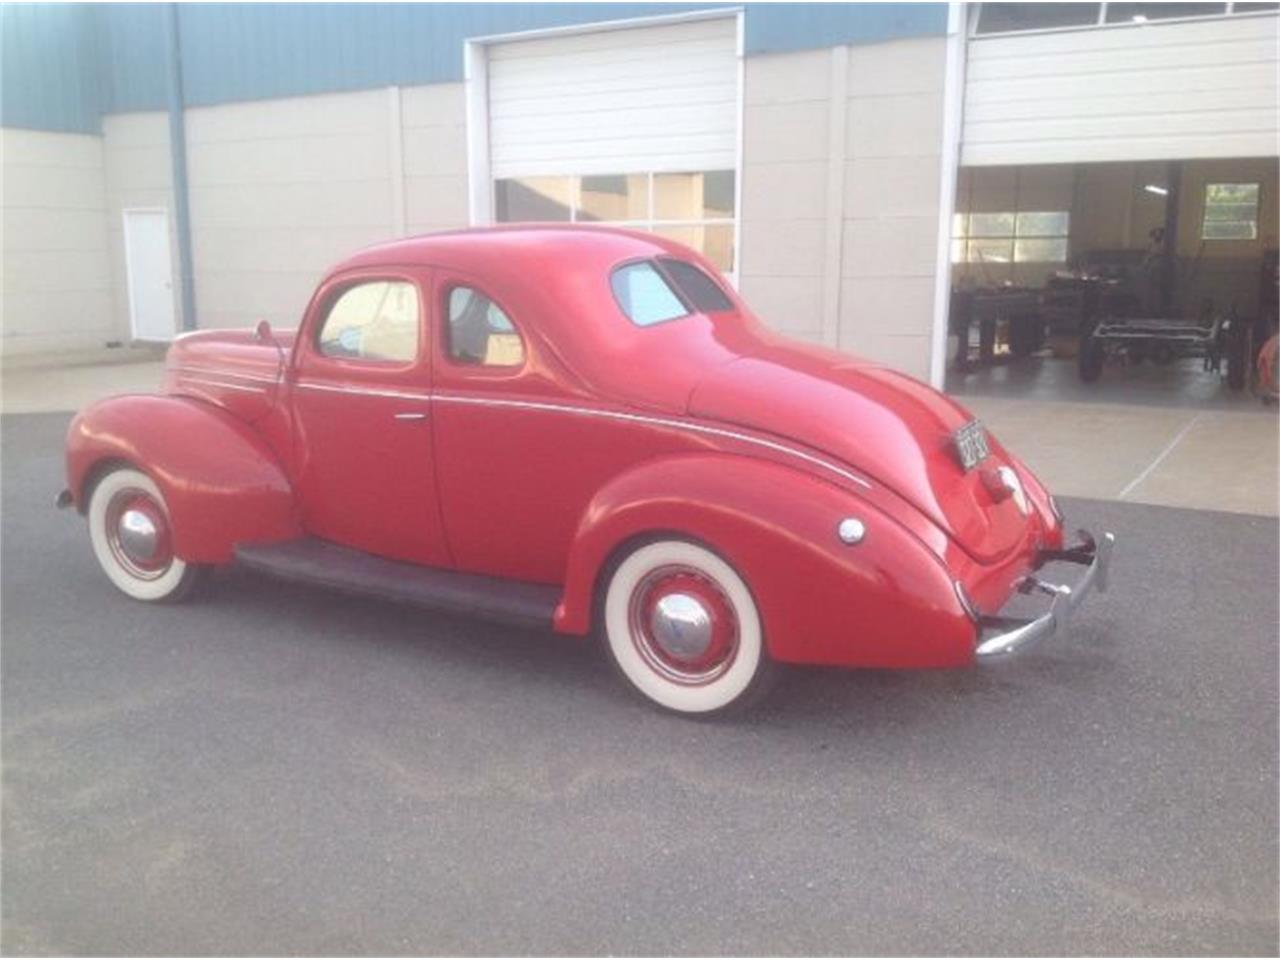 1939 Ford Deluxe for sale in Cadillac, MI